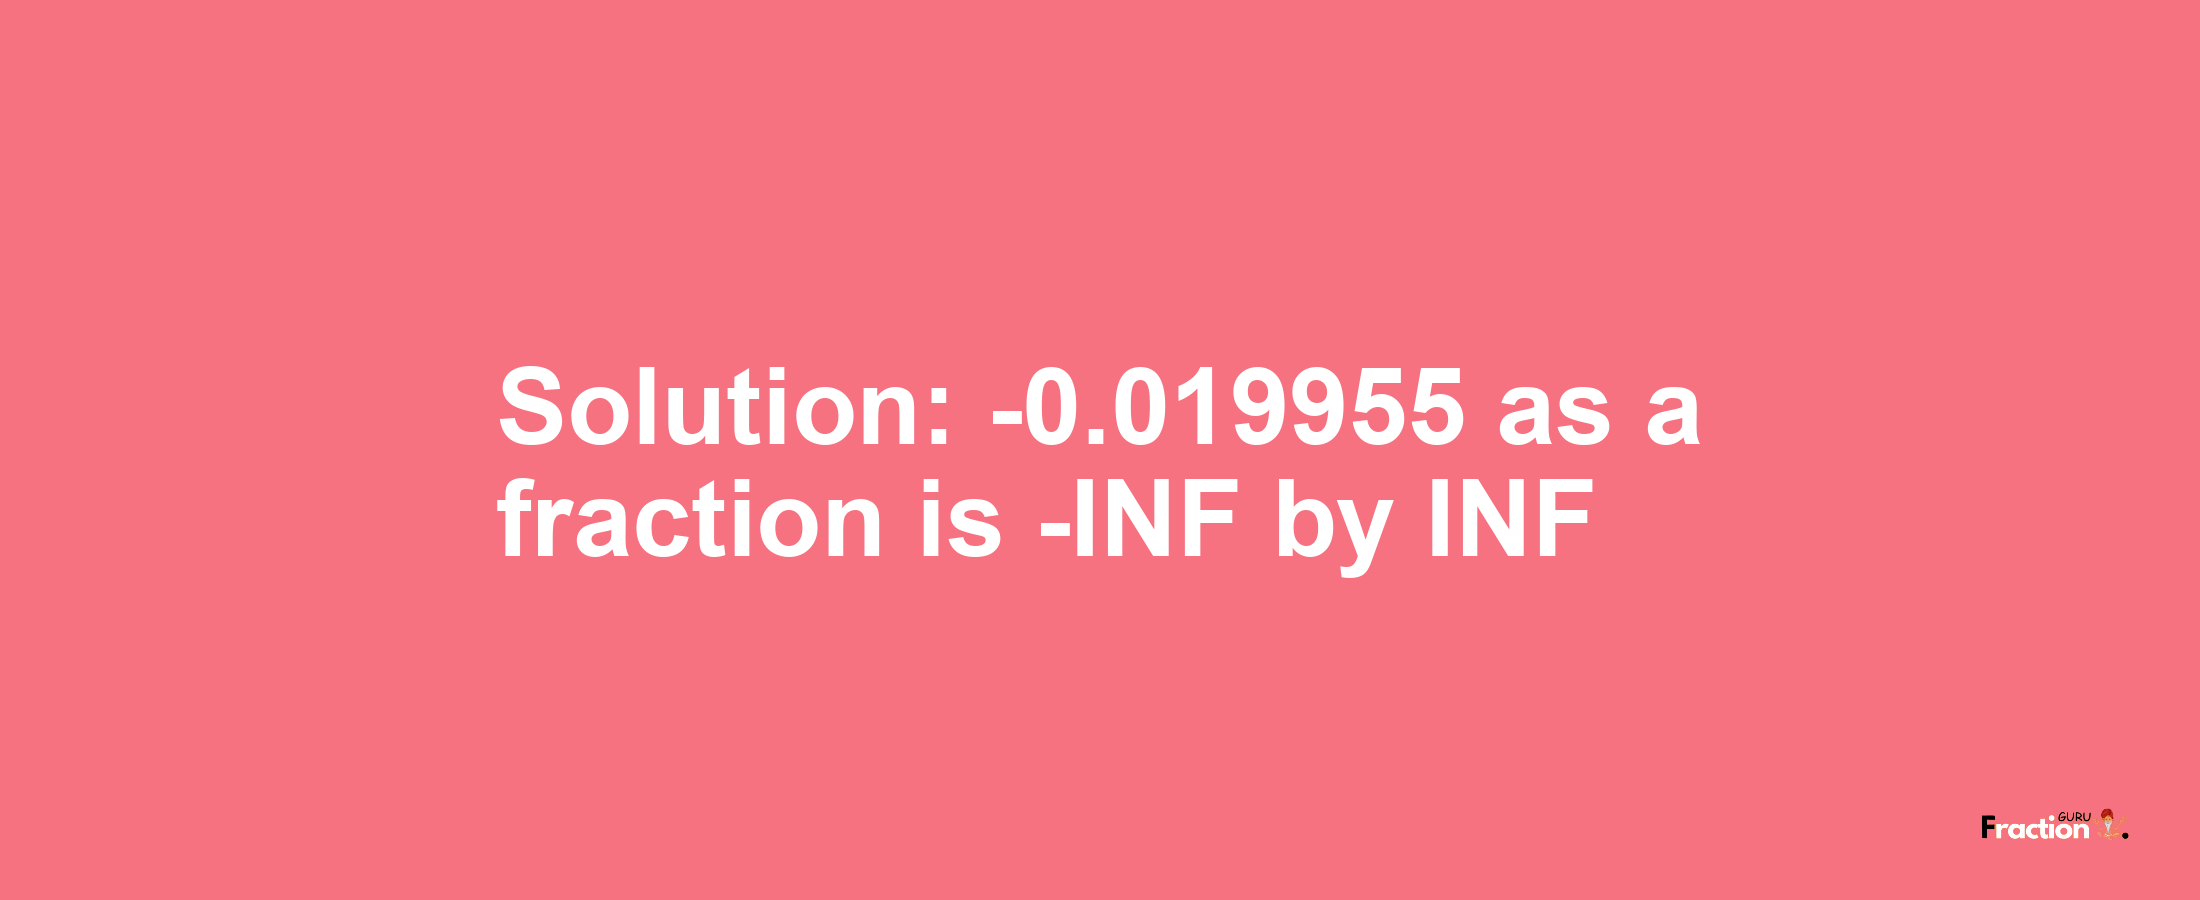 Solution:-0.019955 as a fraction is -INF/INF